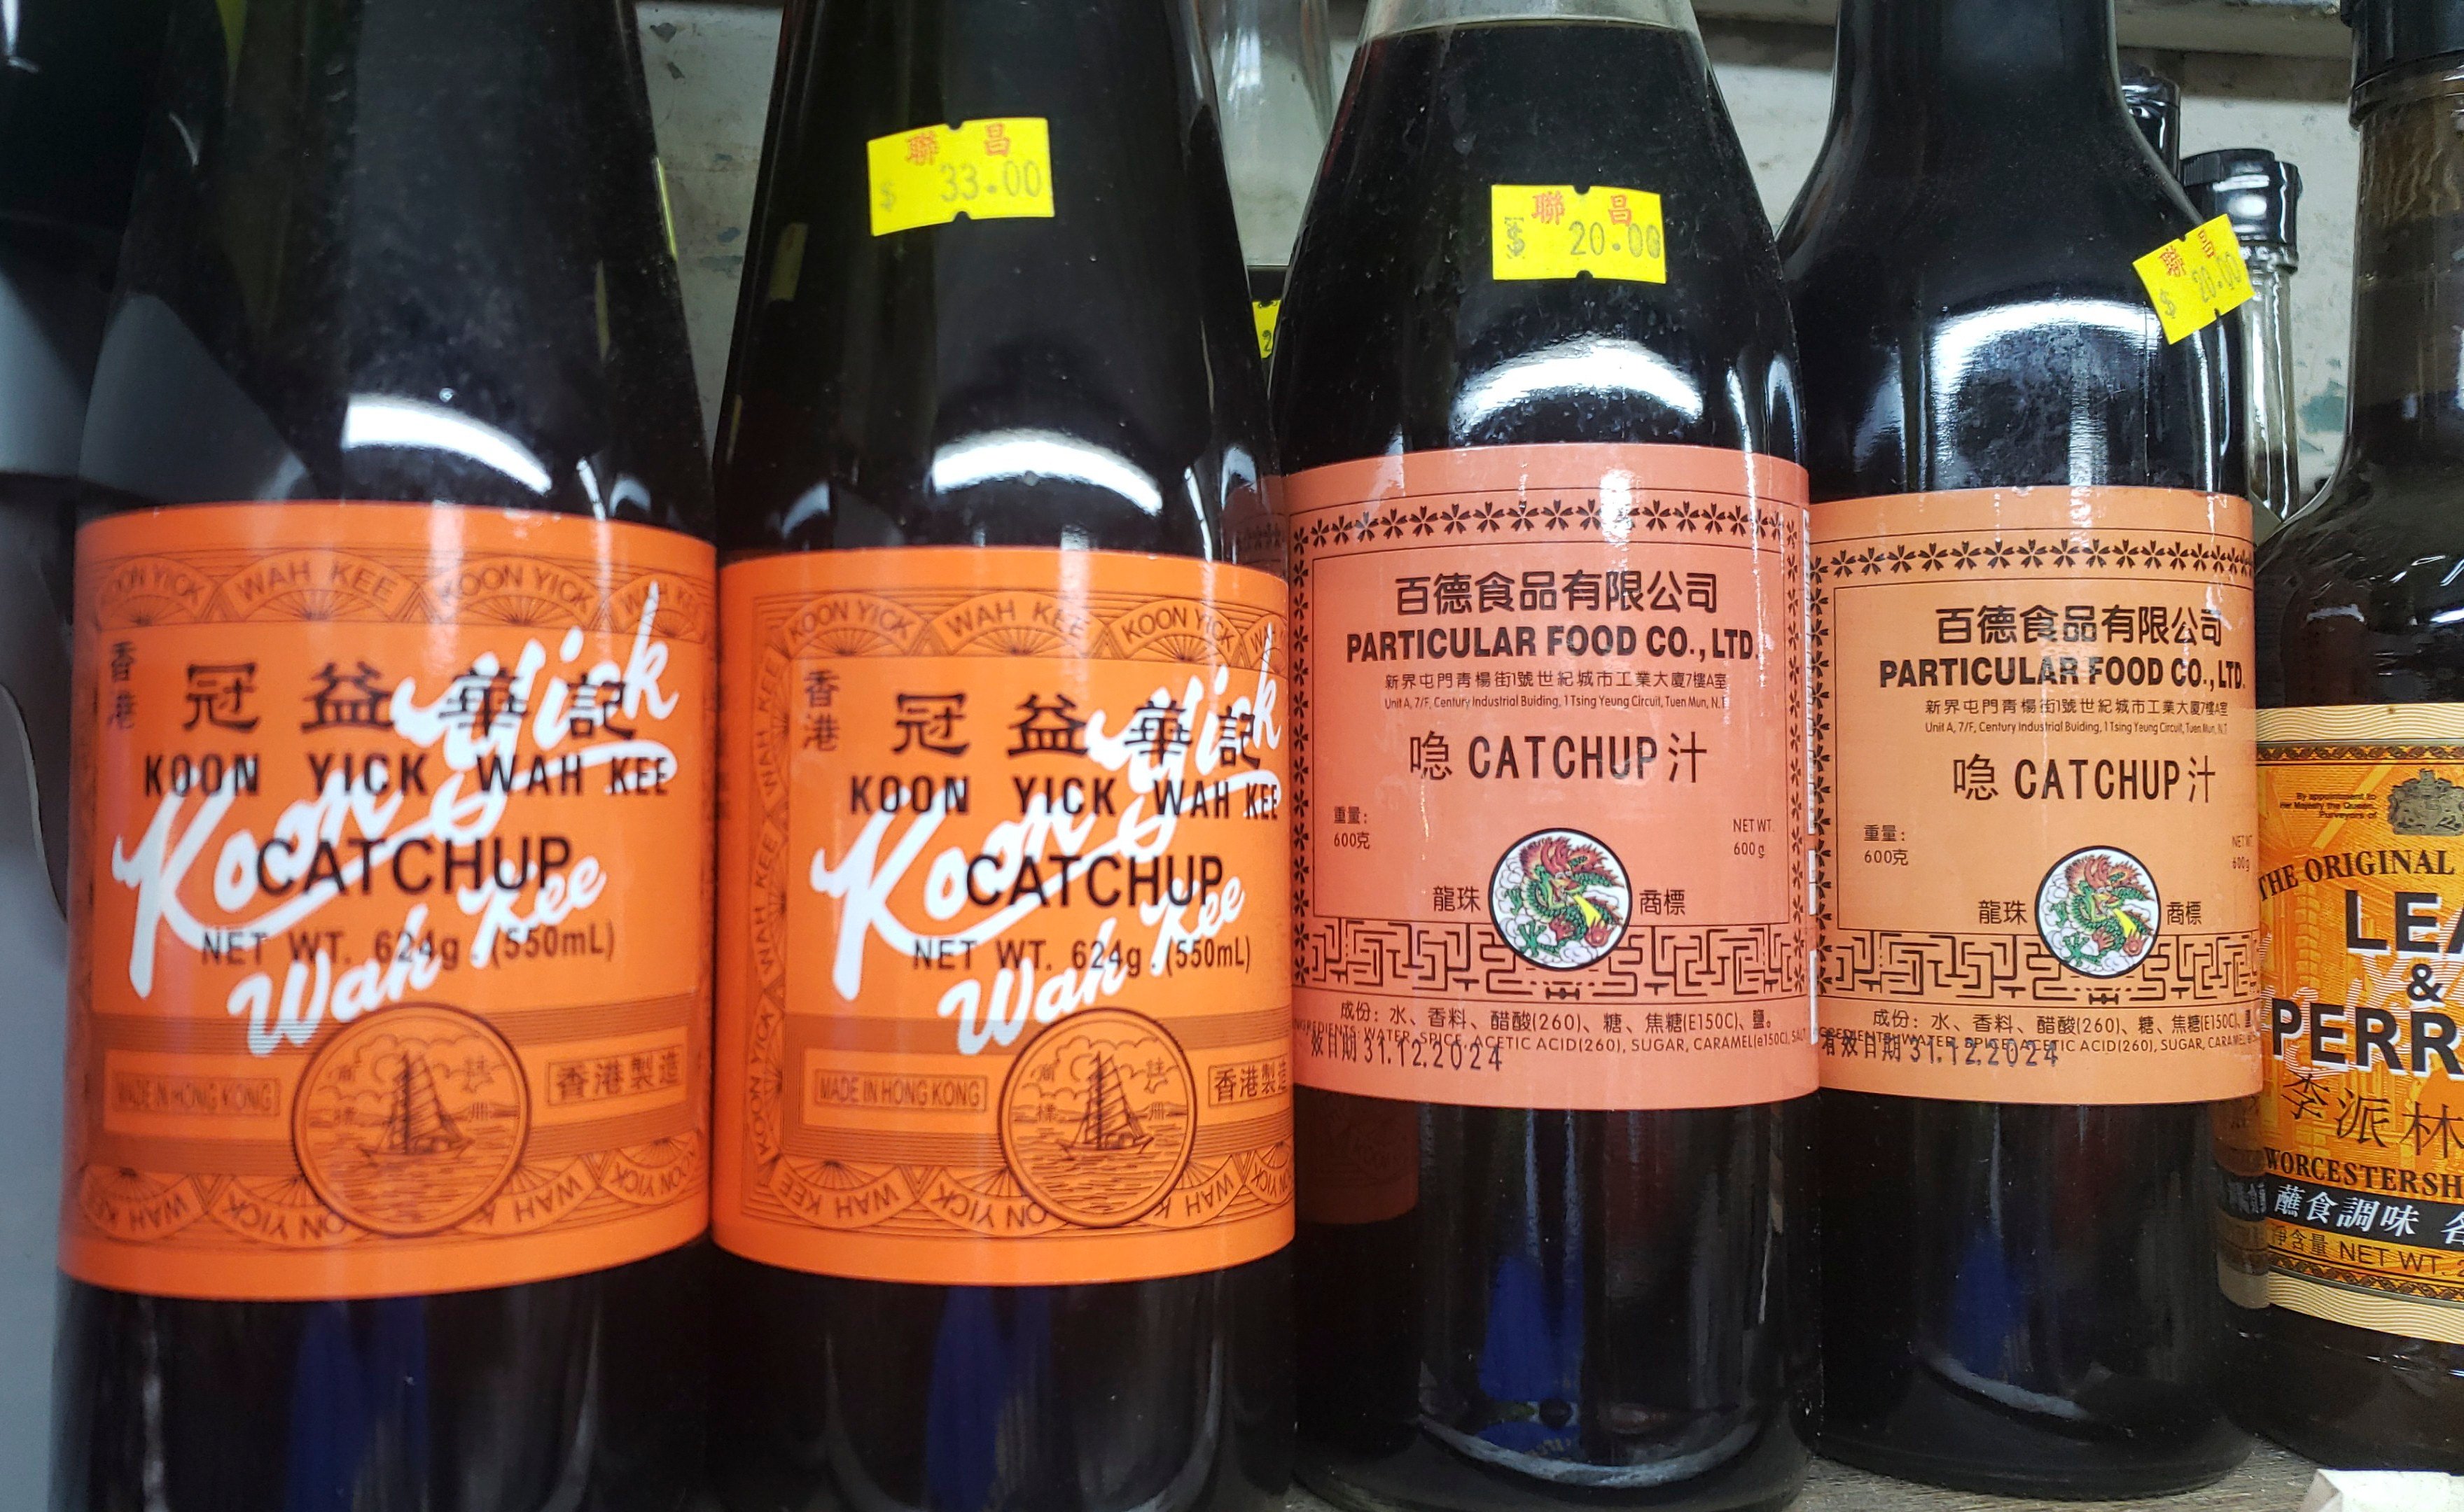 Hong Kong-style variants of foreign foodstuffs are readily recognisable, quirkily distinctive features of local life. Koon Yick Wah Kee’s Catchup (left) and Particular Food Co. Ltd’s Catchup on sale in a shop. Photo: Jason Wordie